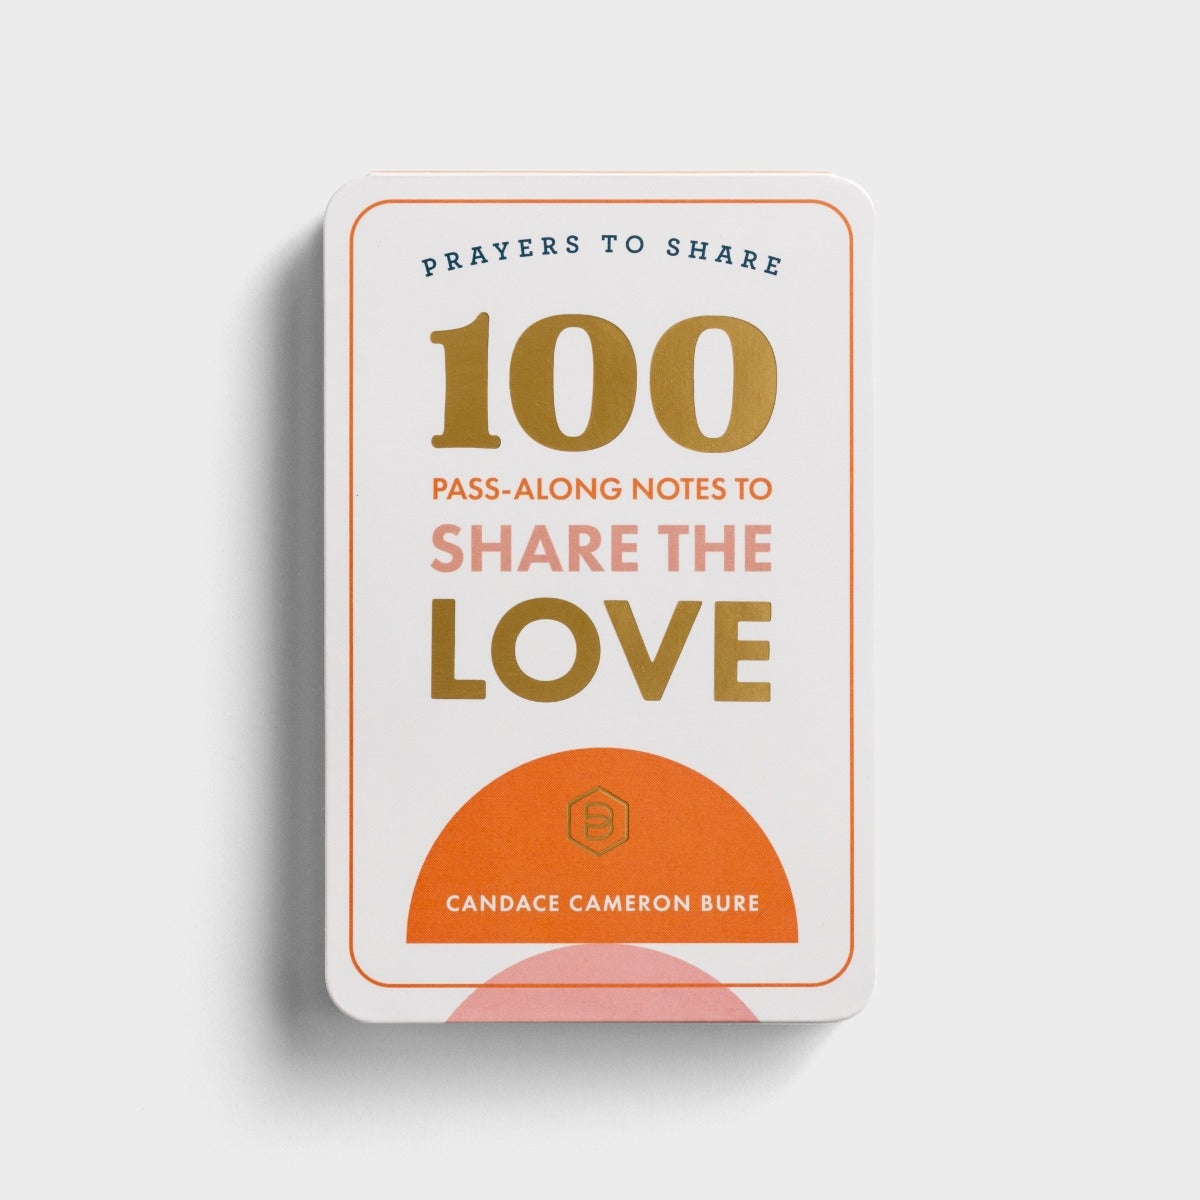 Prayers to Share: 100 Notes to Share the Love | Candace Cameron Bure front.